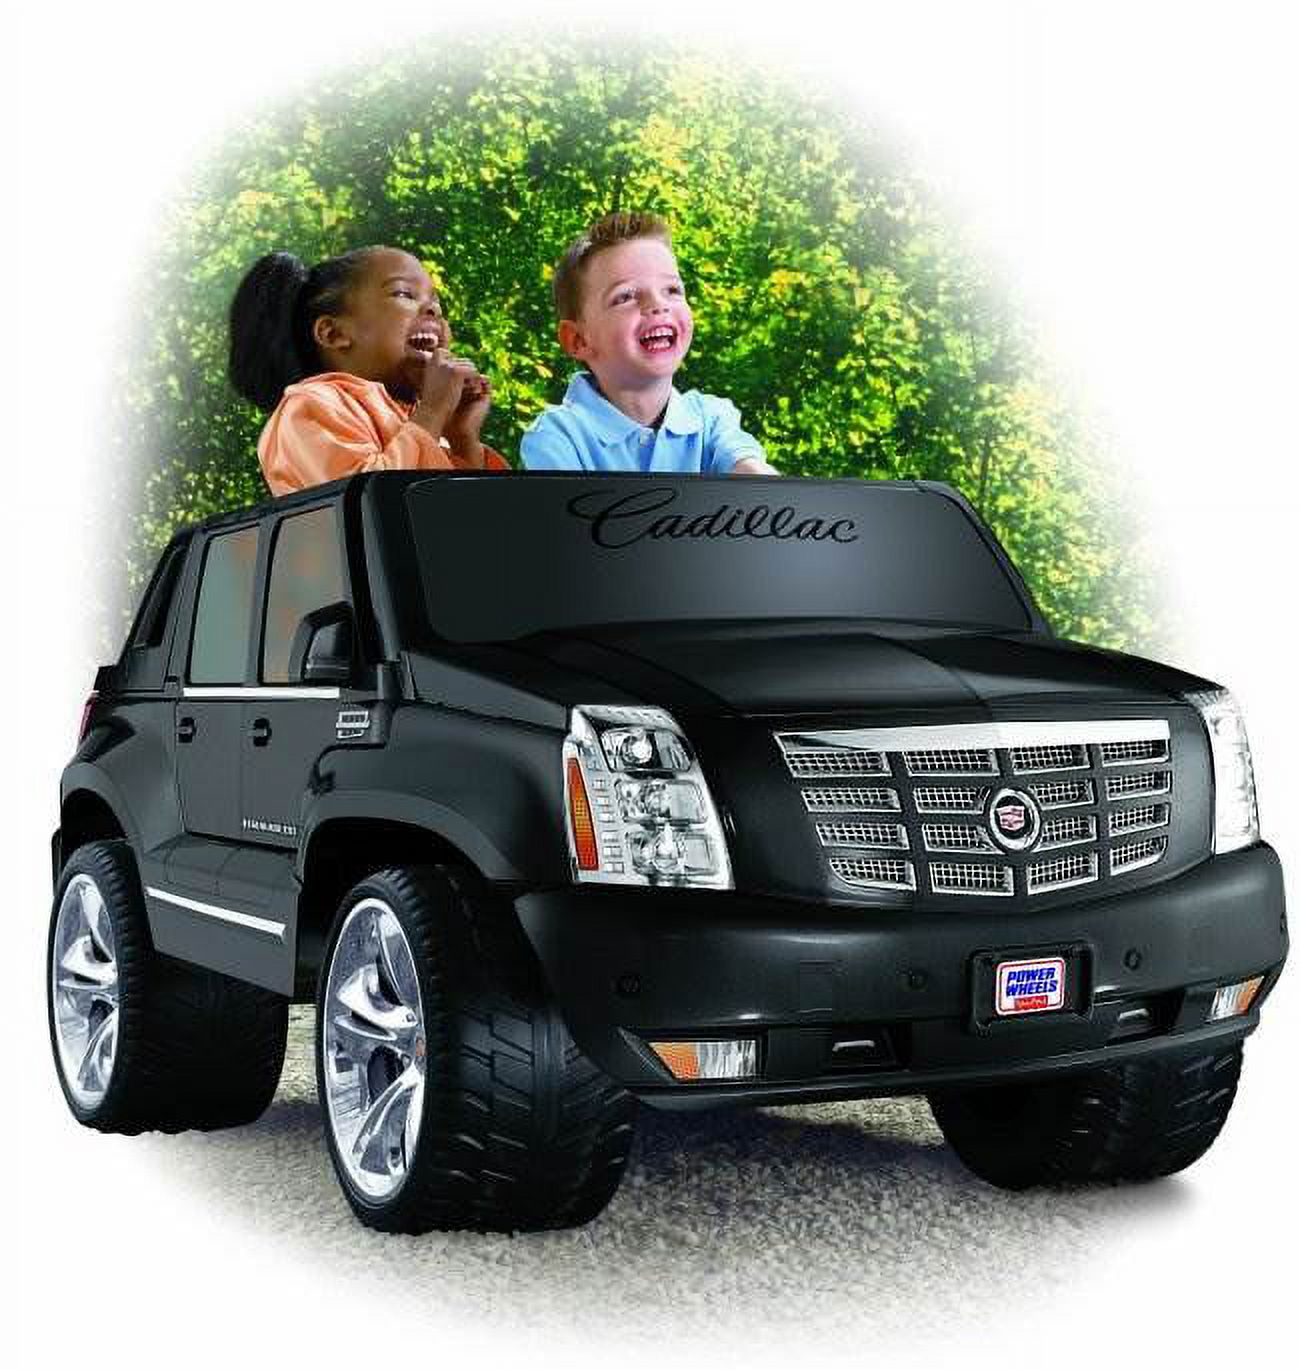 Power Wheels Cadillac Escalade EXT 12V Electric Ride-On Truck | N9522 - image 1 of 4